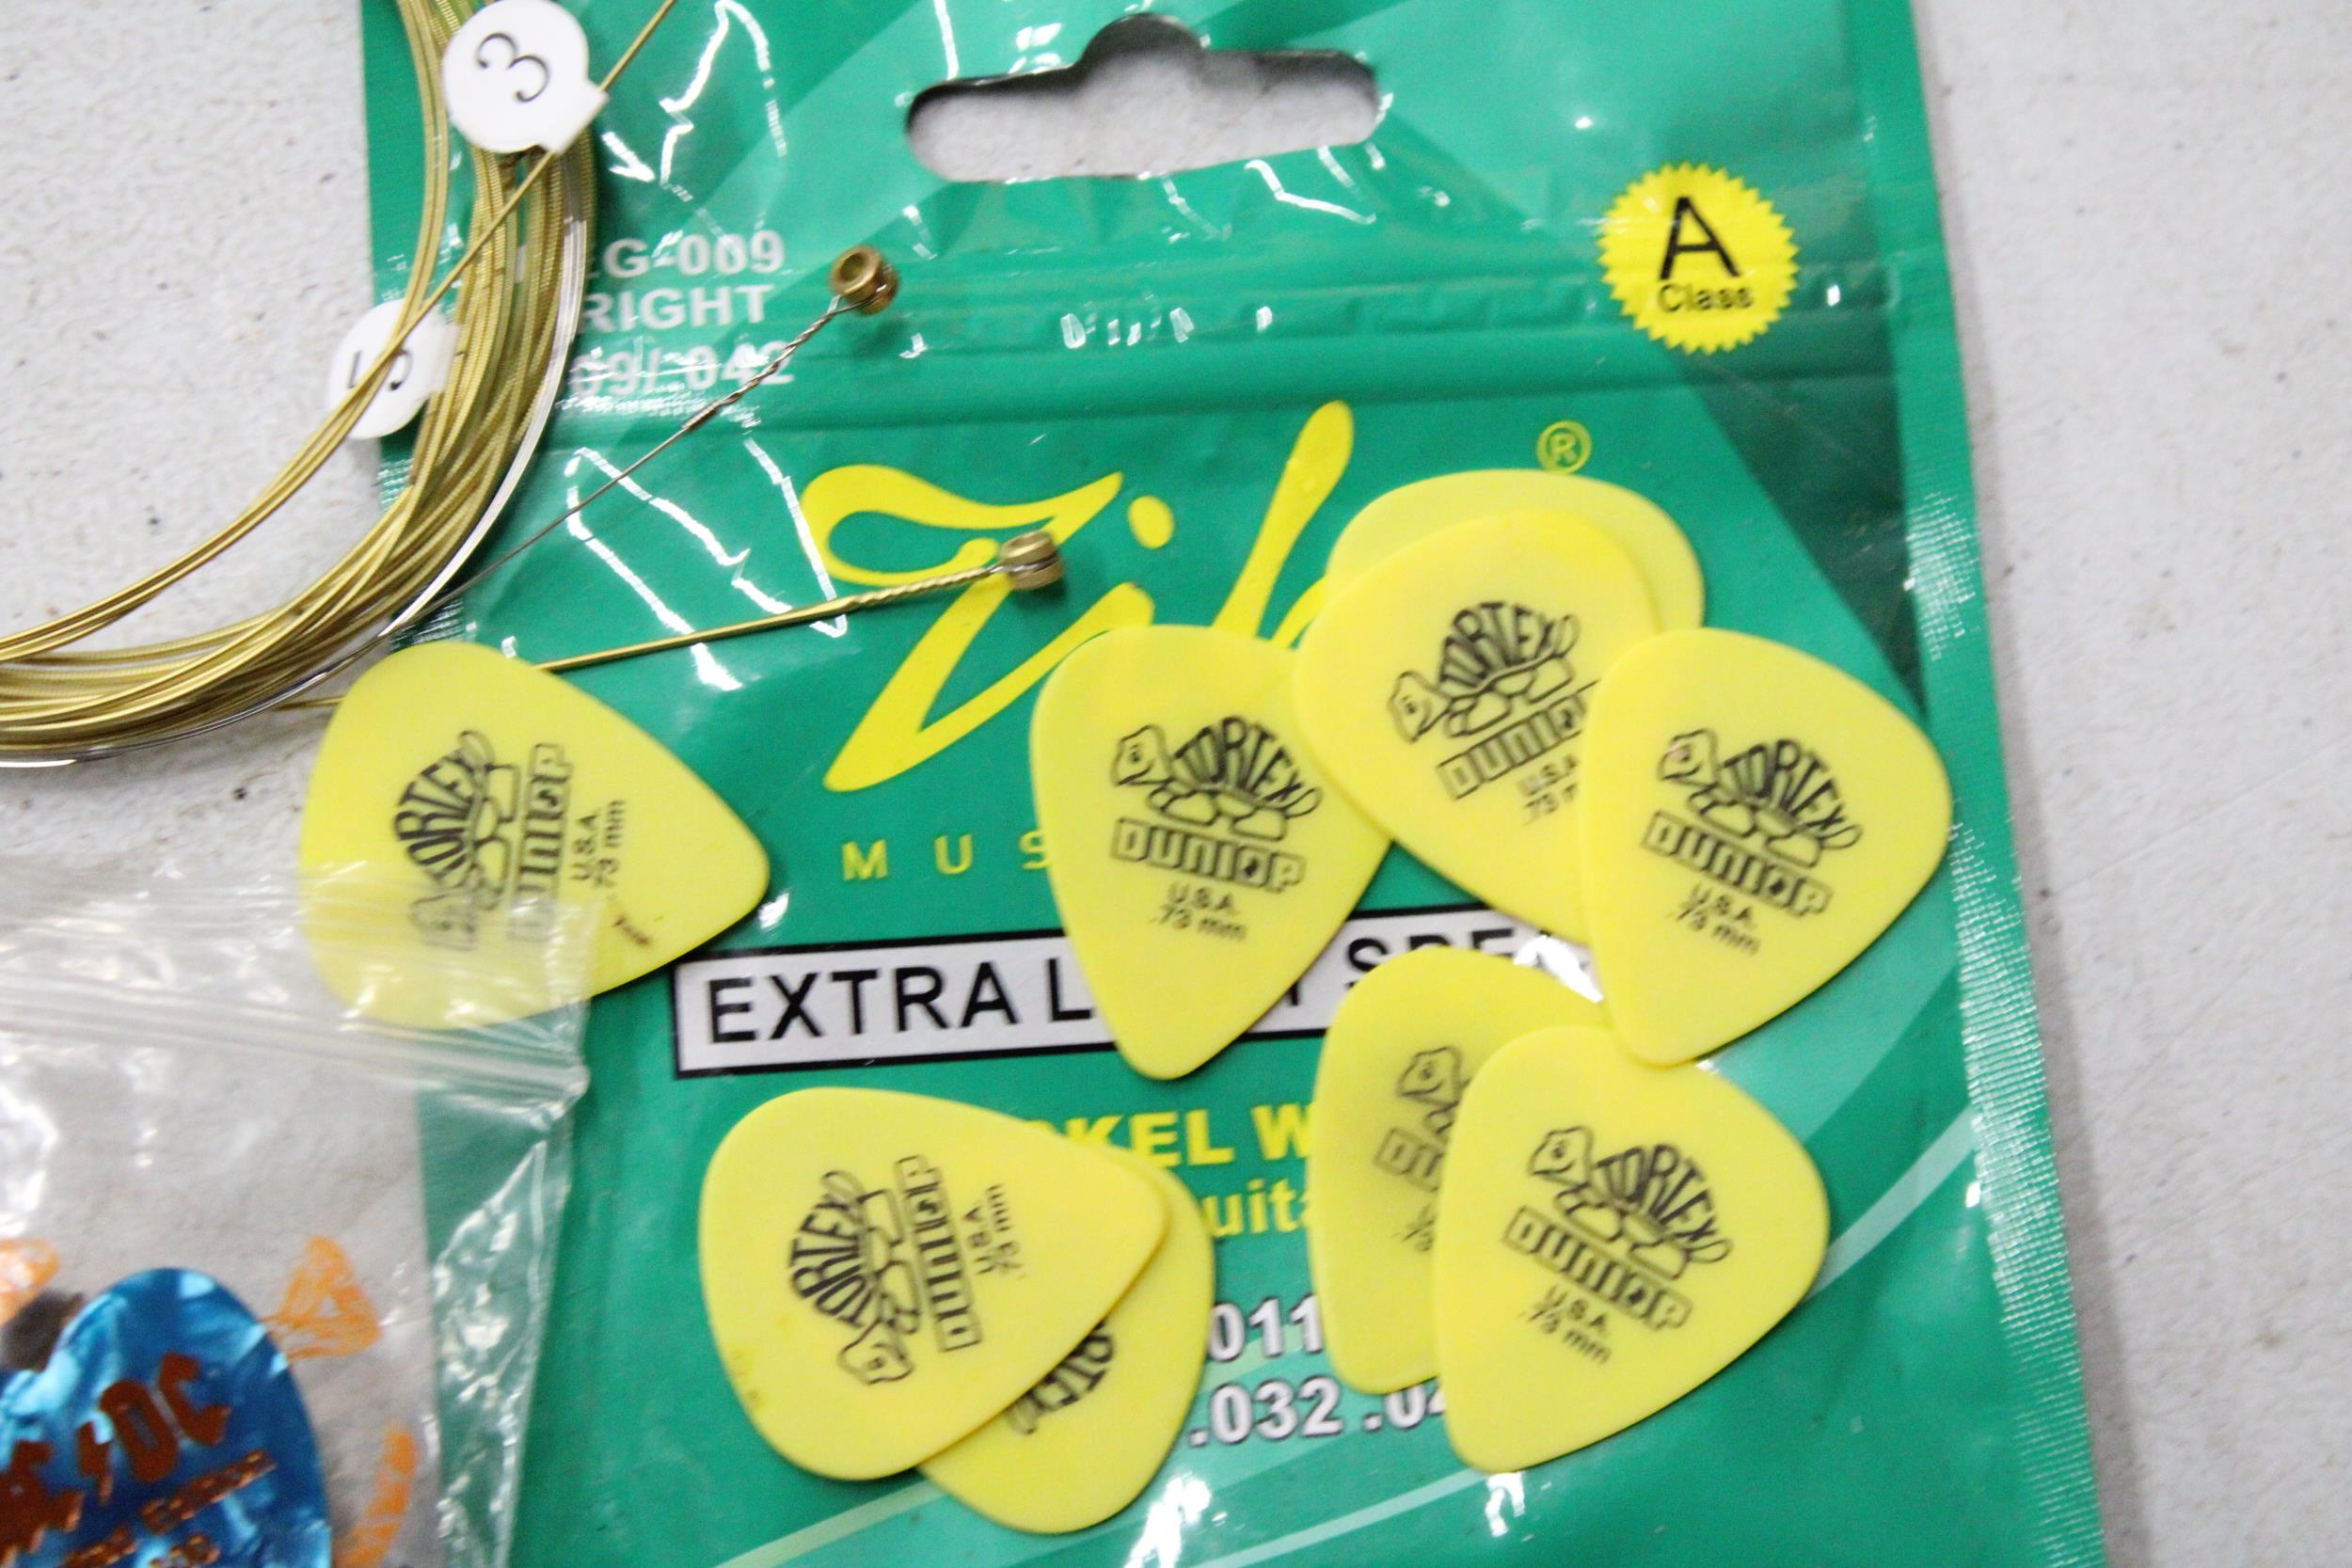 A QUANTITY OF ELECTRIC GUITAR STRINGS AND PLECTRUMS - Image 2 of 5